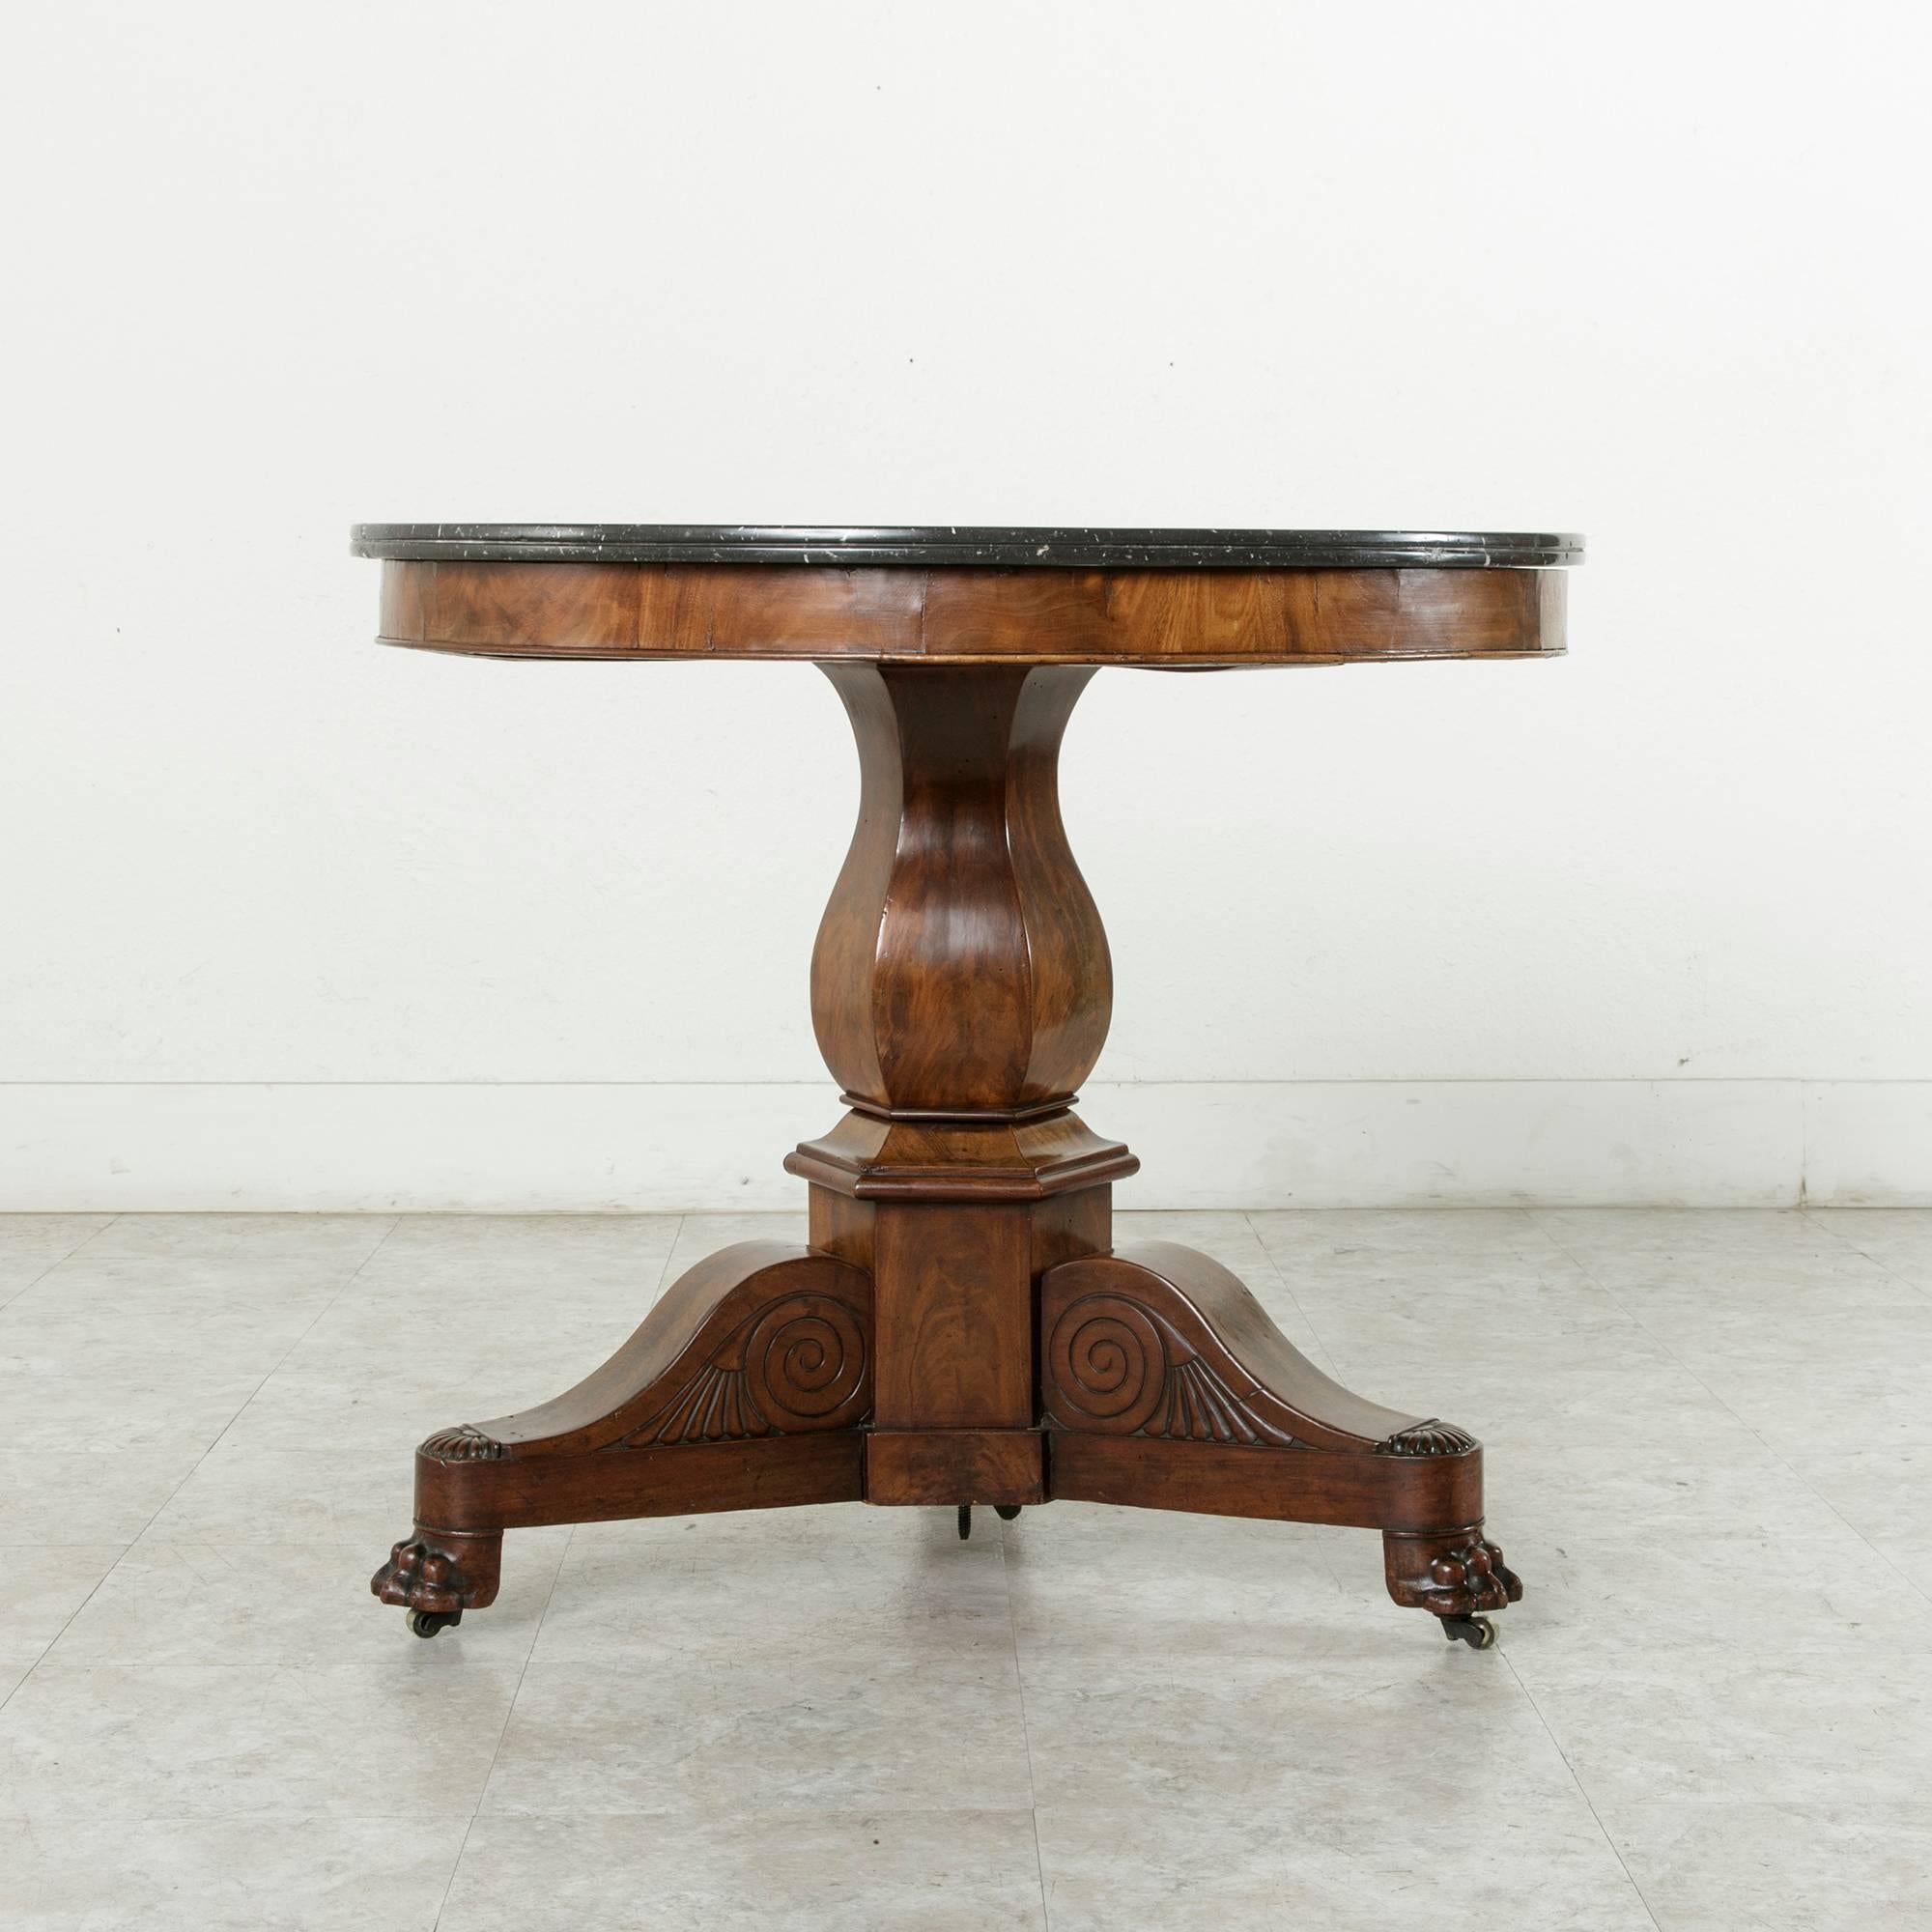 19th Century French Restauration Period Mahogany Gueridon or Pedestal Table 2